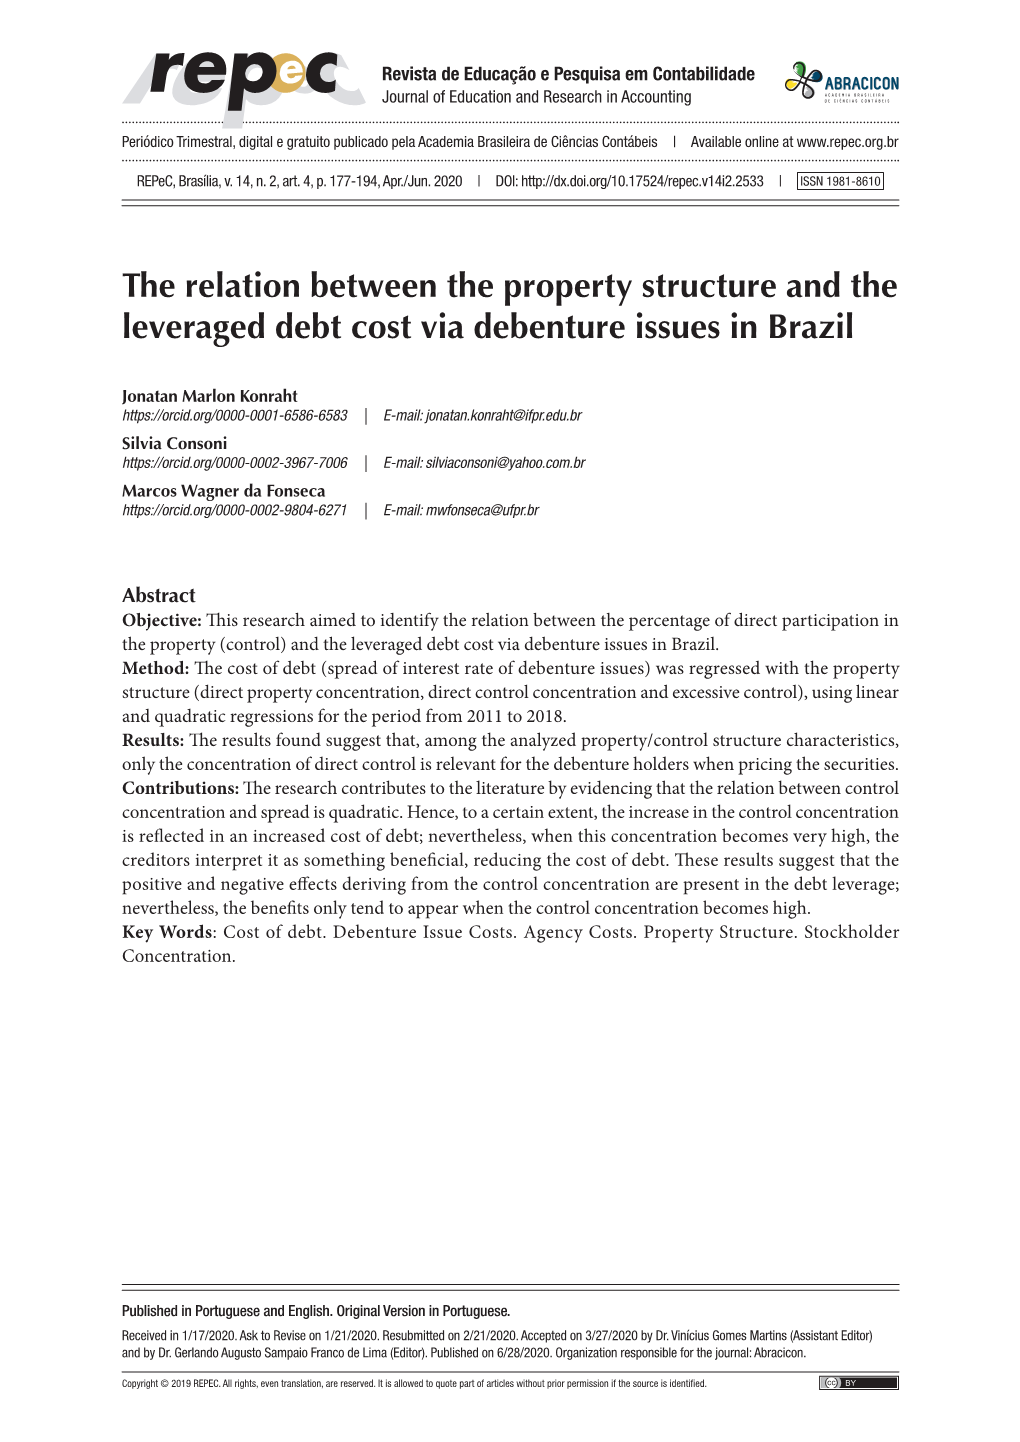 The Relation Between the Property Structure and the Leveraged Debt Cost Via Debenture Issues in Brazil